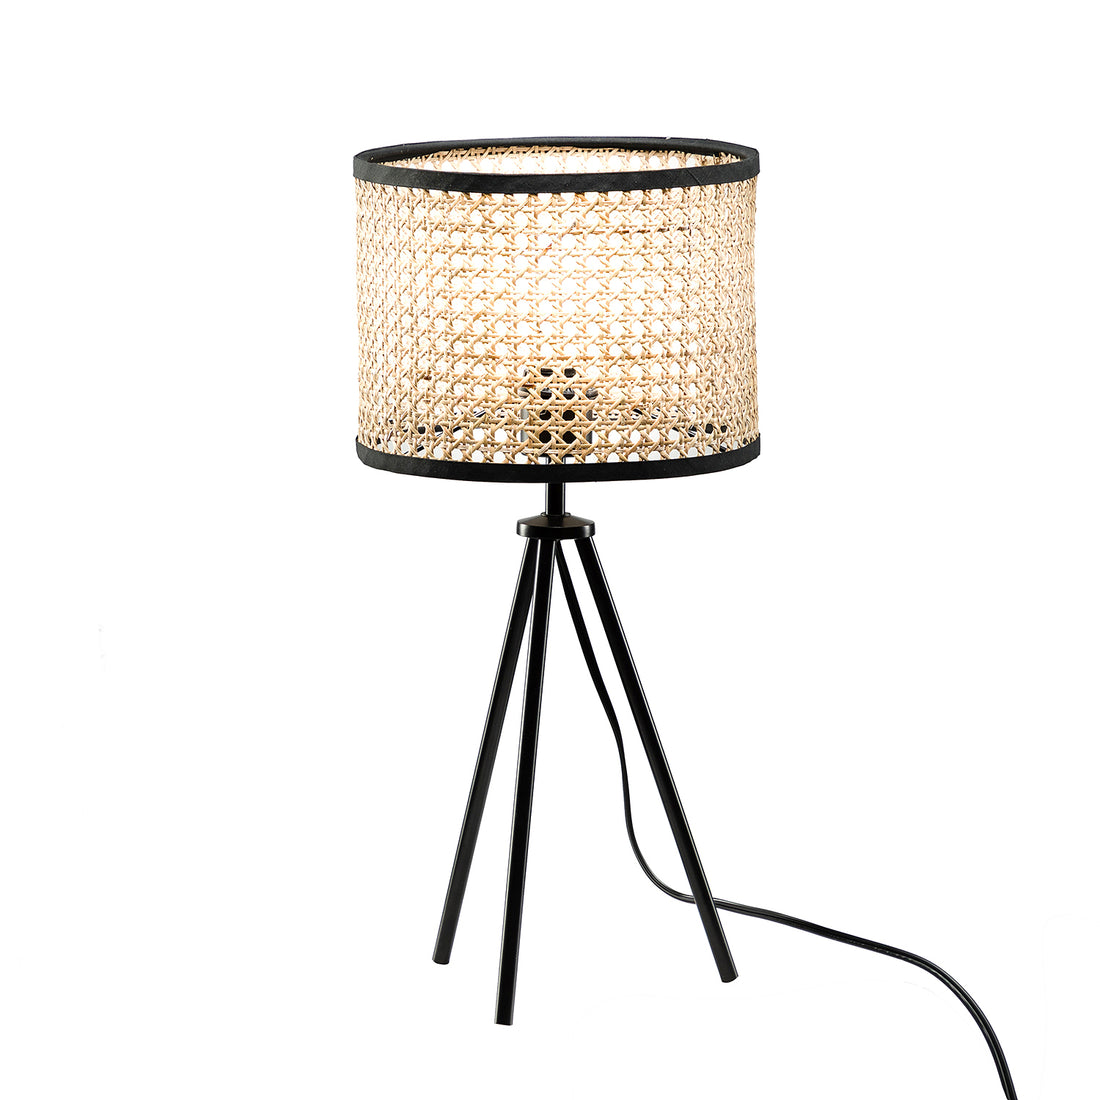 Temesa Rattan 21.3" Table Lamp with In line